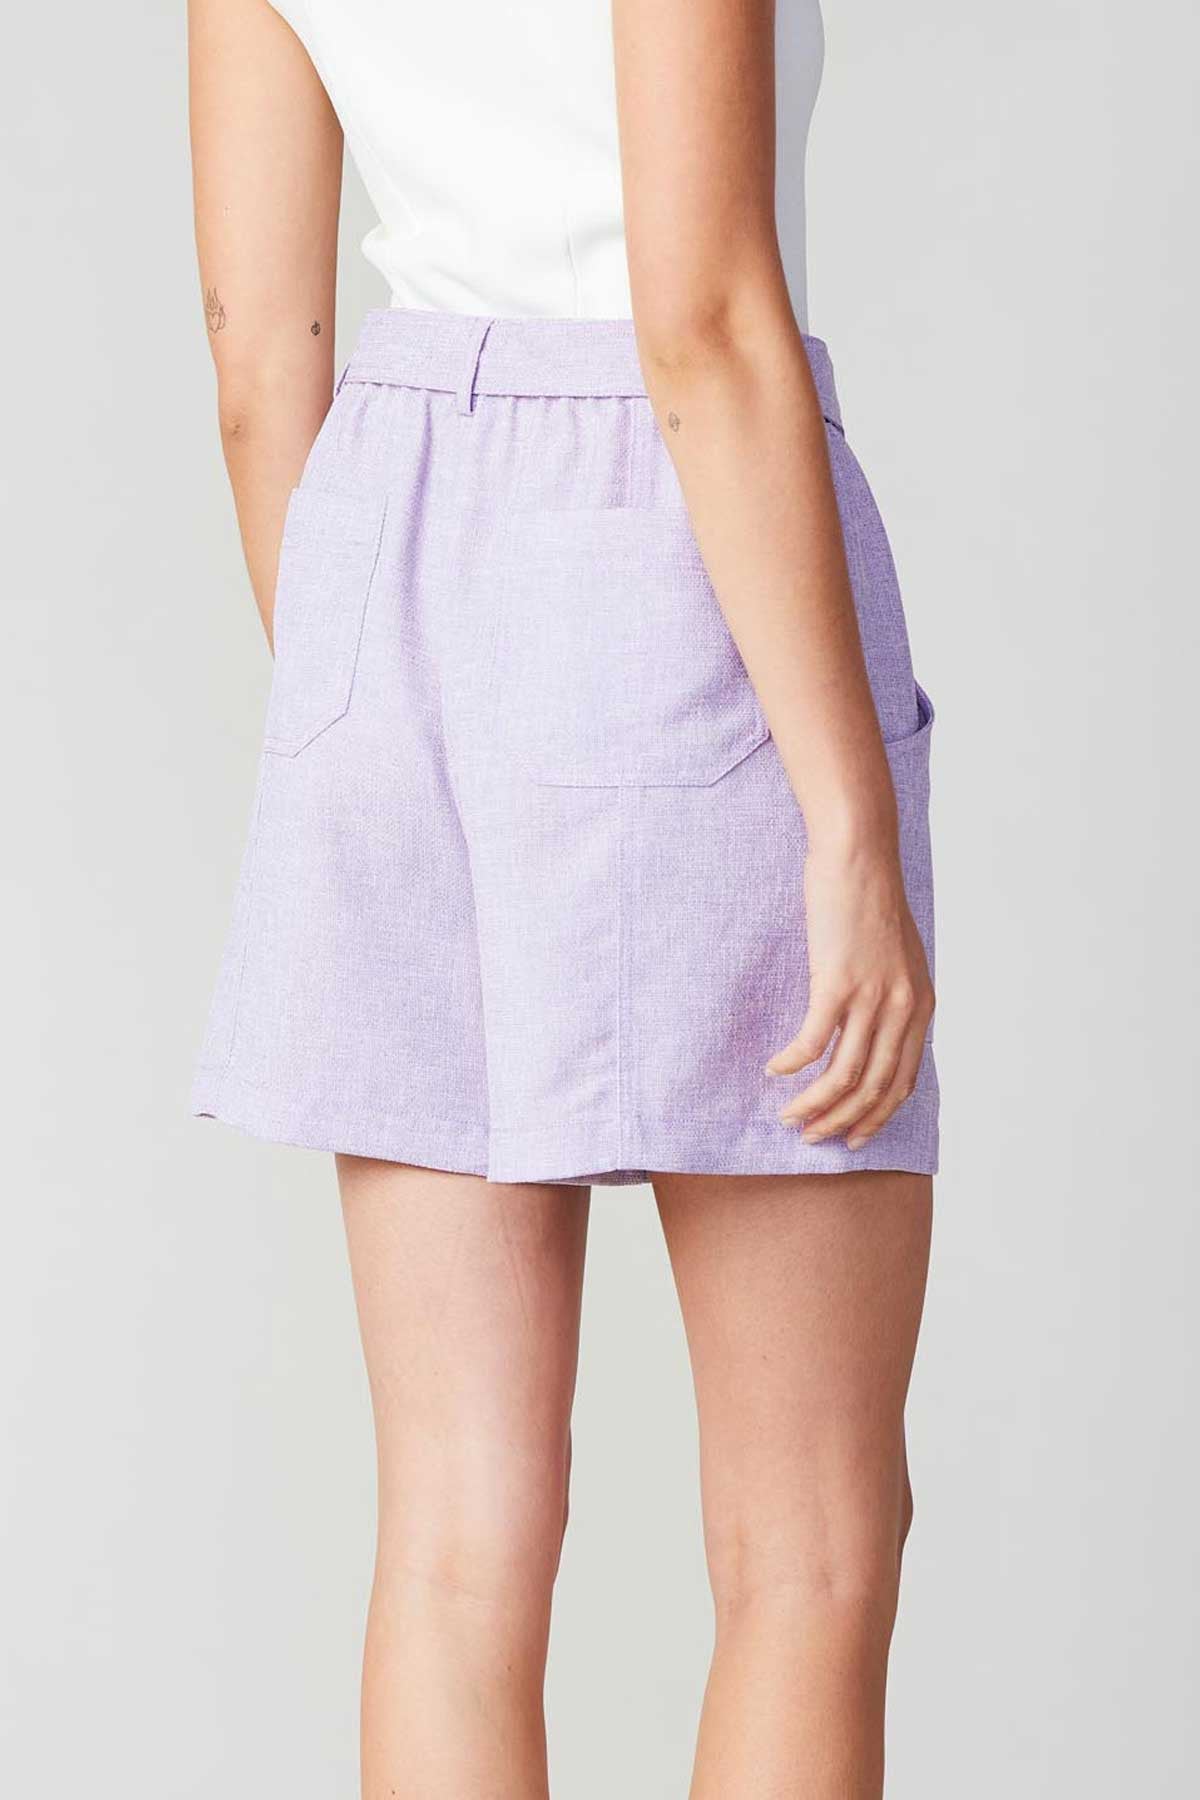 Out of Pocket Detail Shorts